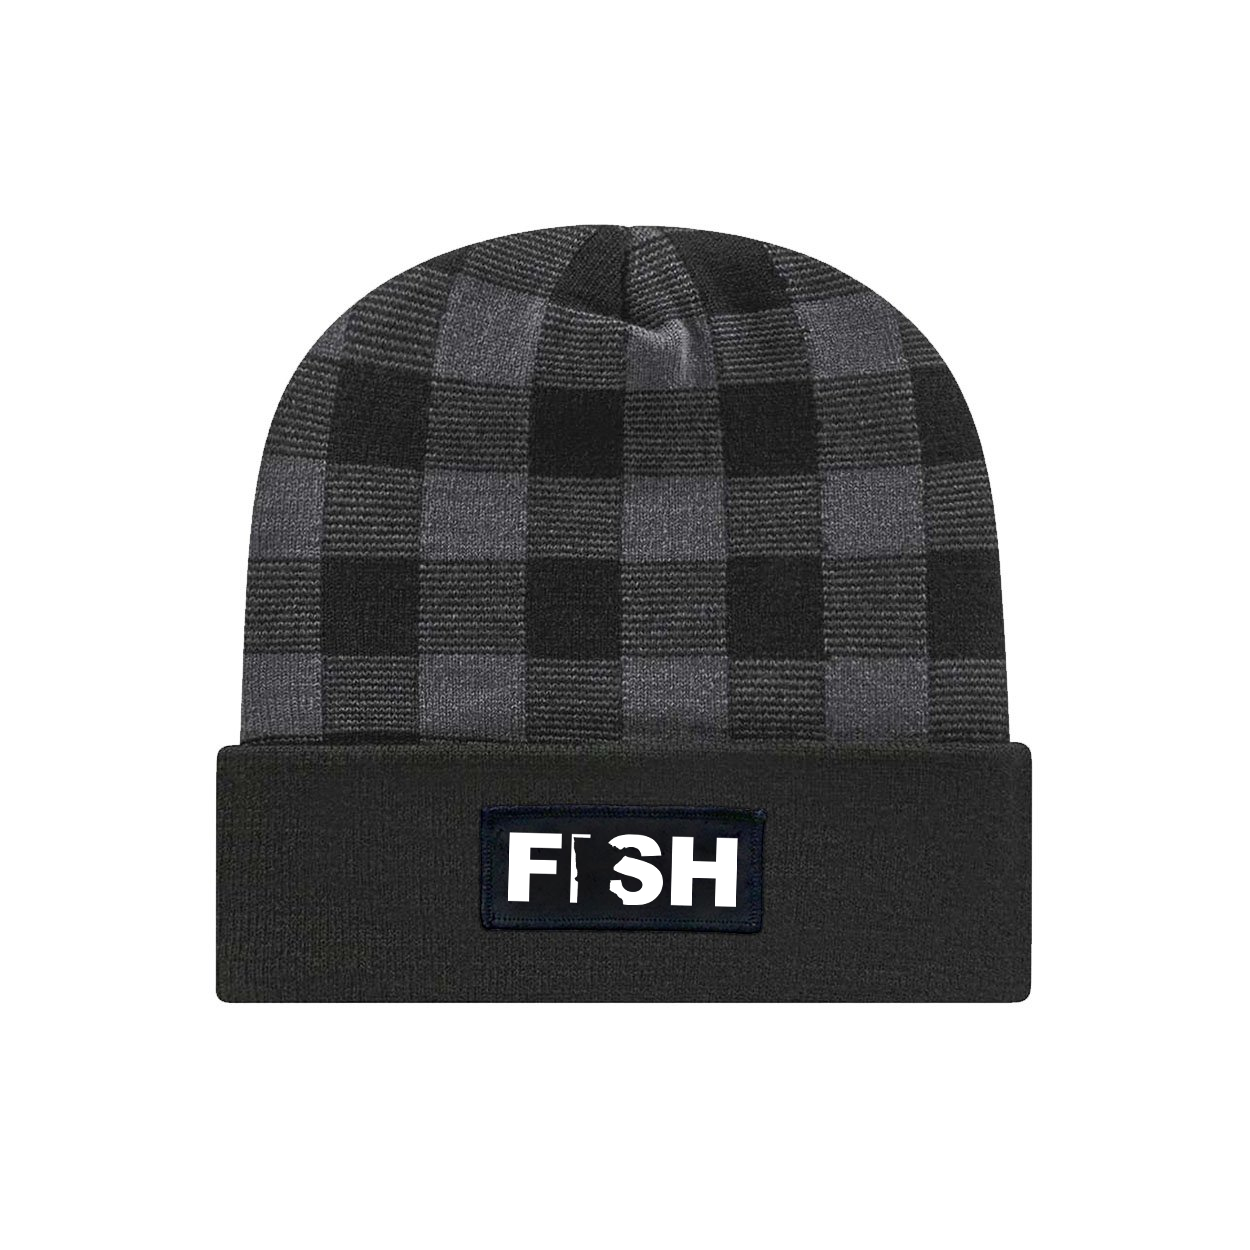 Fish Minnesota Night Out Woven Patch Roll Up Plaid Beanie Black/Heather Gray (White Logo)